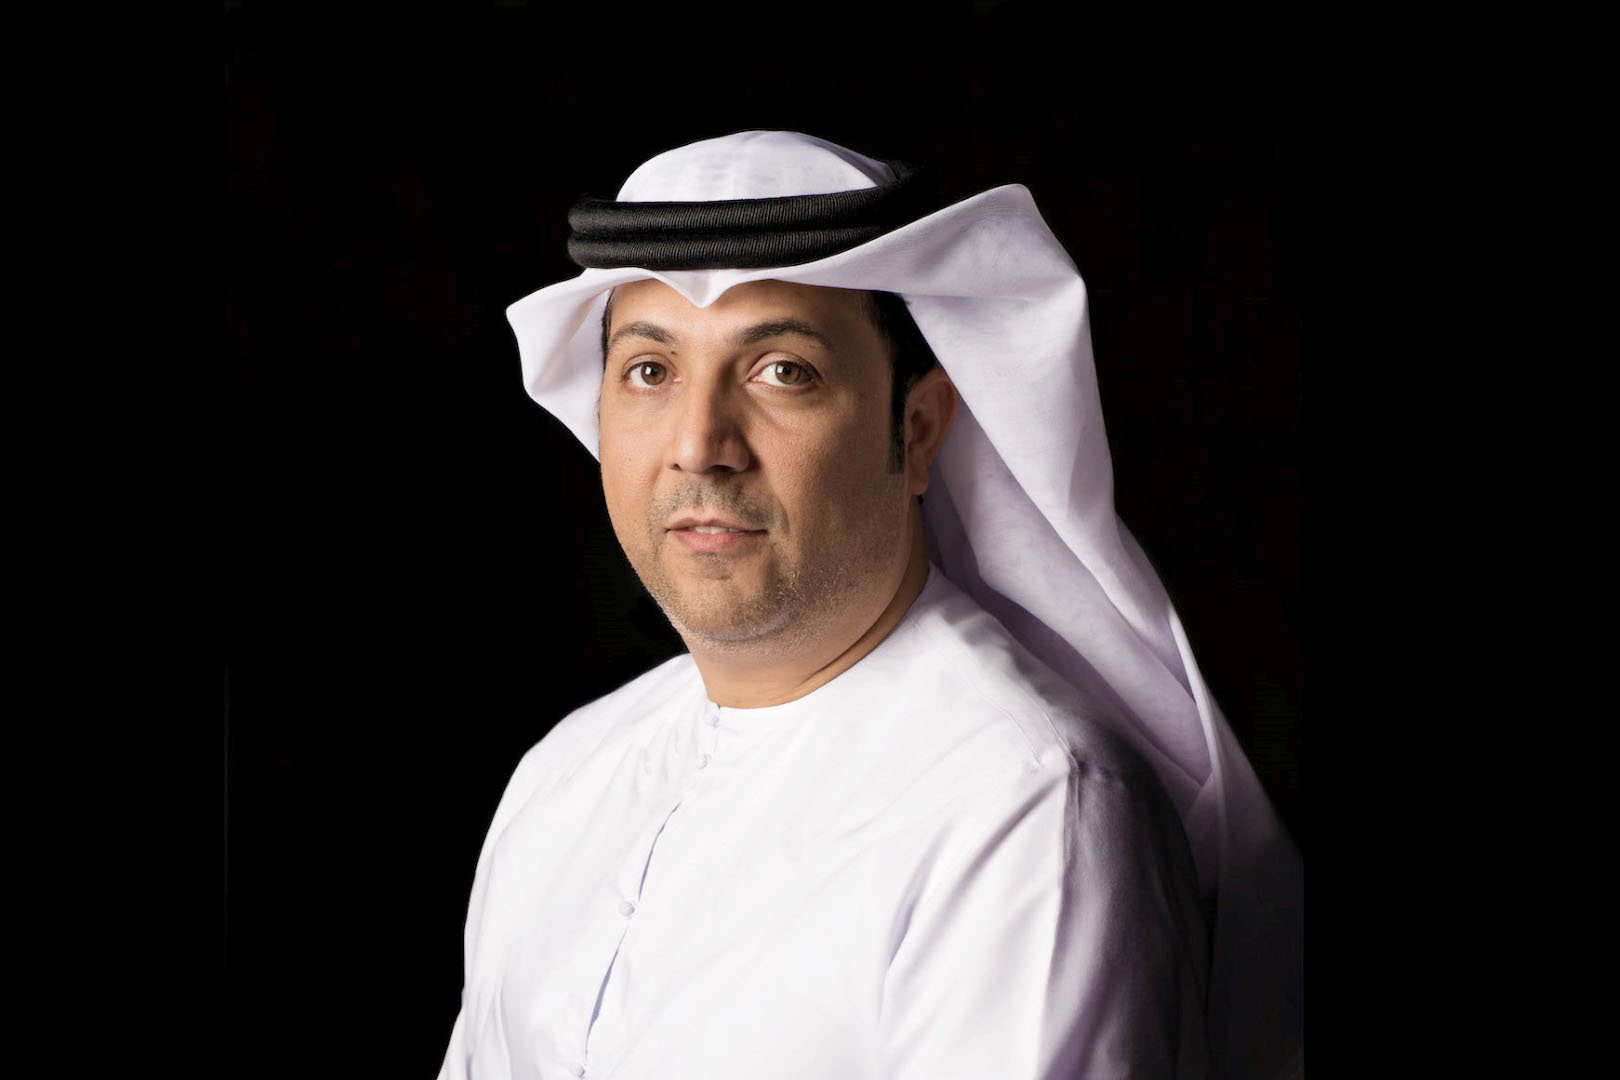 Director of the Sharjah Government Media Office emphasizes the importance of public opinion in the process of government communication in the emirate